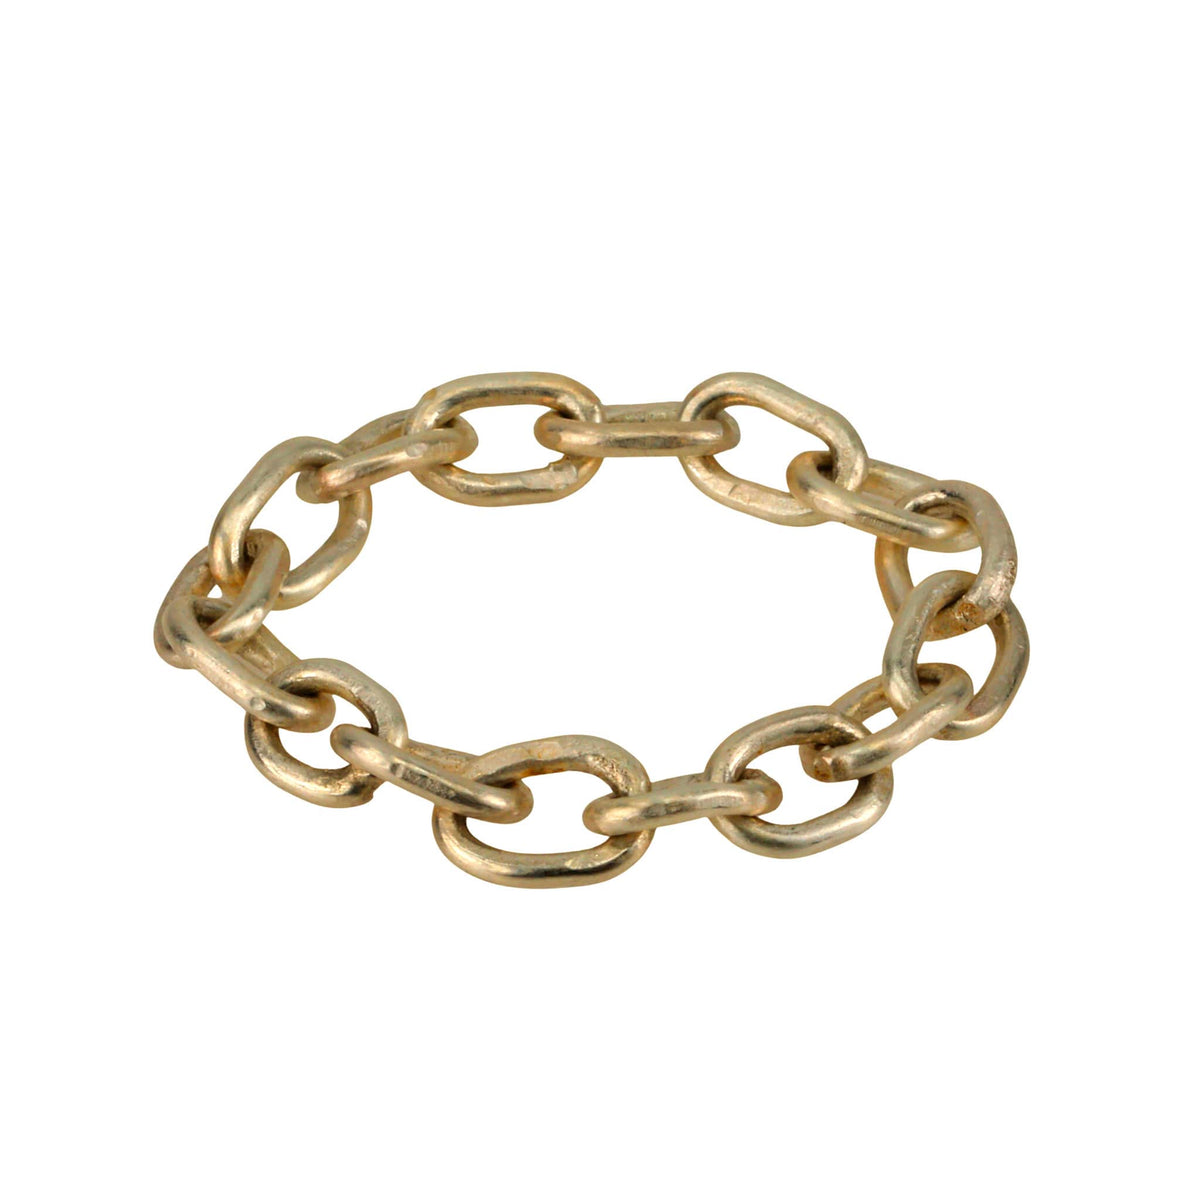 Linked Chain Scarf Ring in Gold Color - Diana